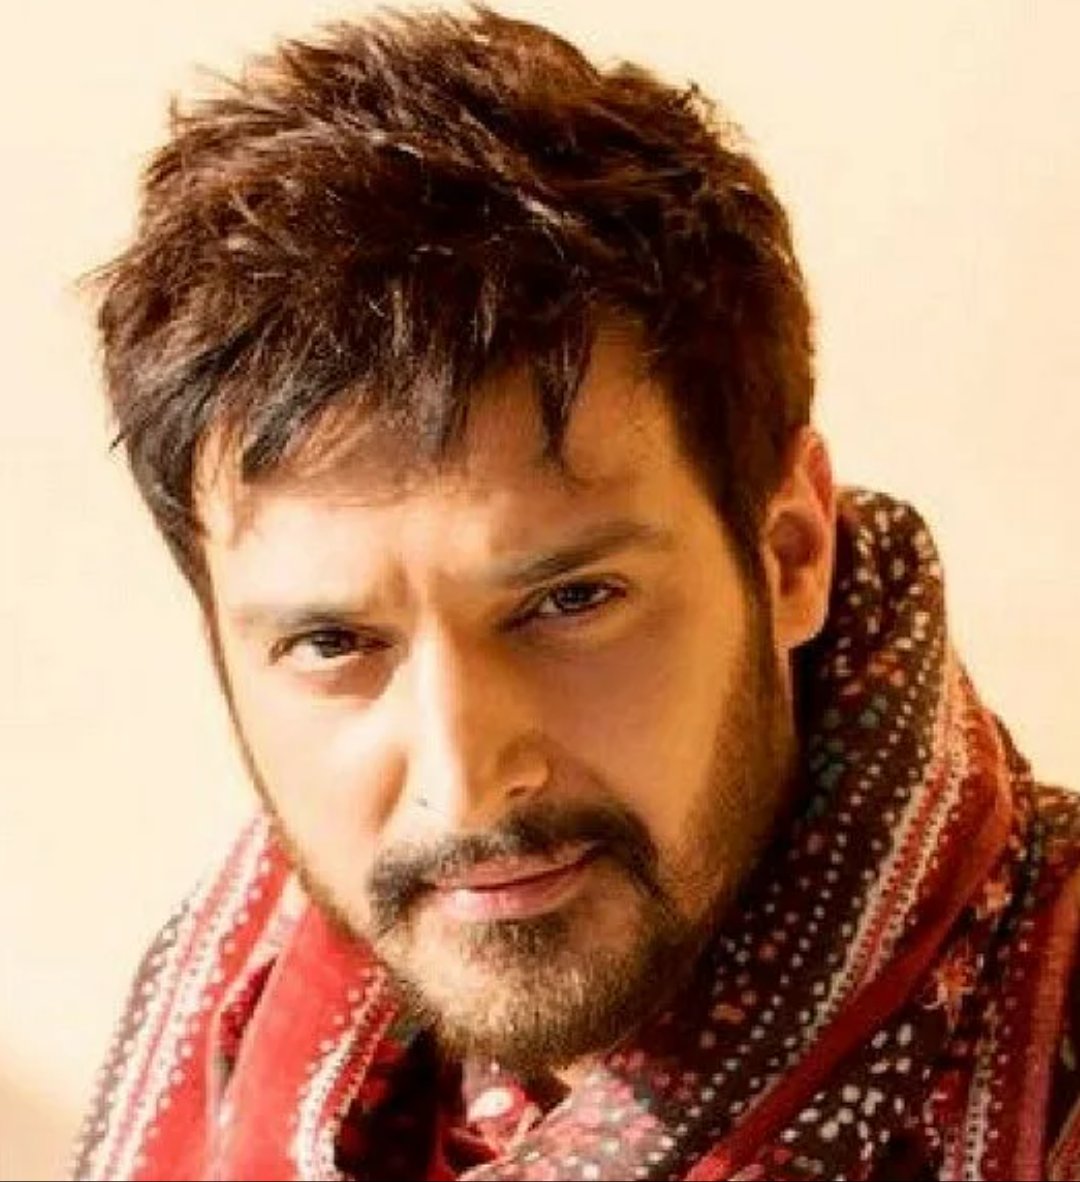 Bollywood Movies And Tv Shows Casting - Rangbaaz Season 2 Starring Jimmy  Shergill Premiering on ZEE5 soon. | Facebook